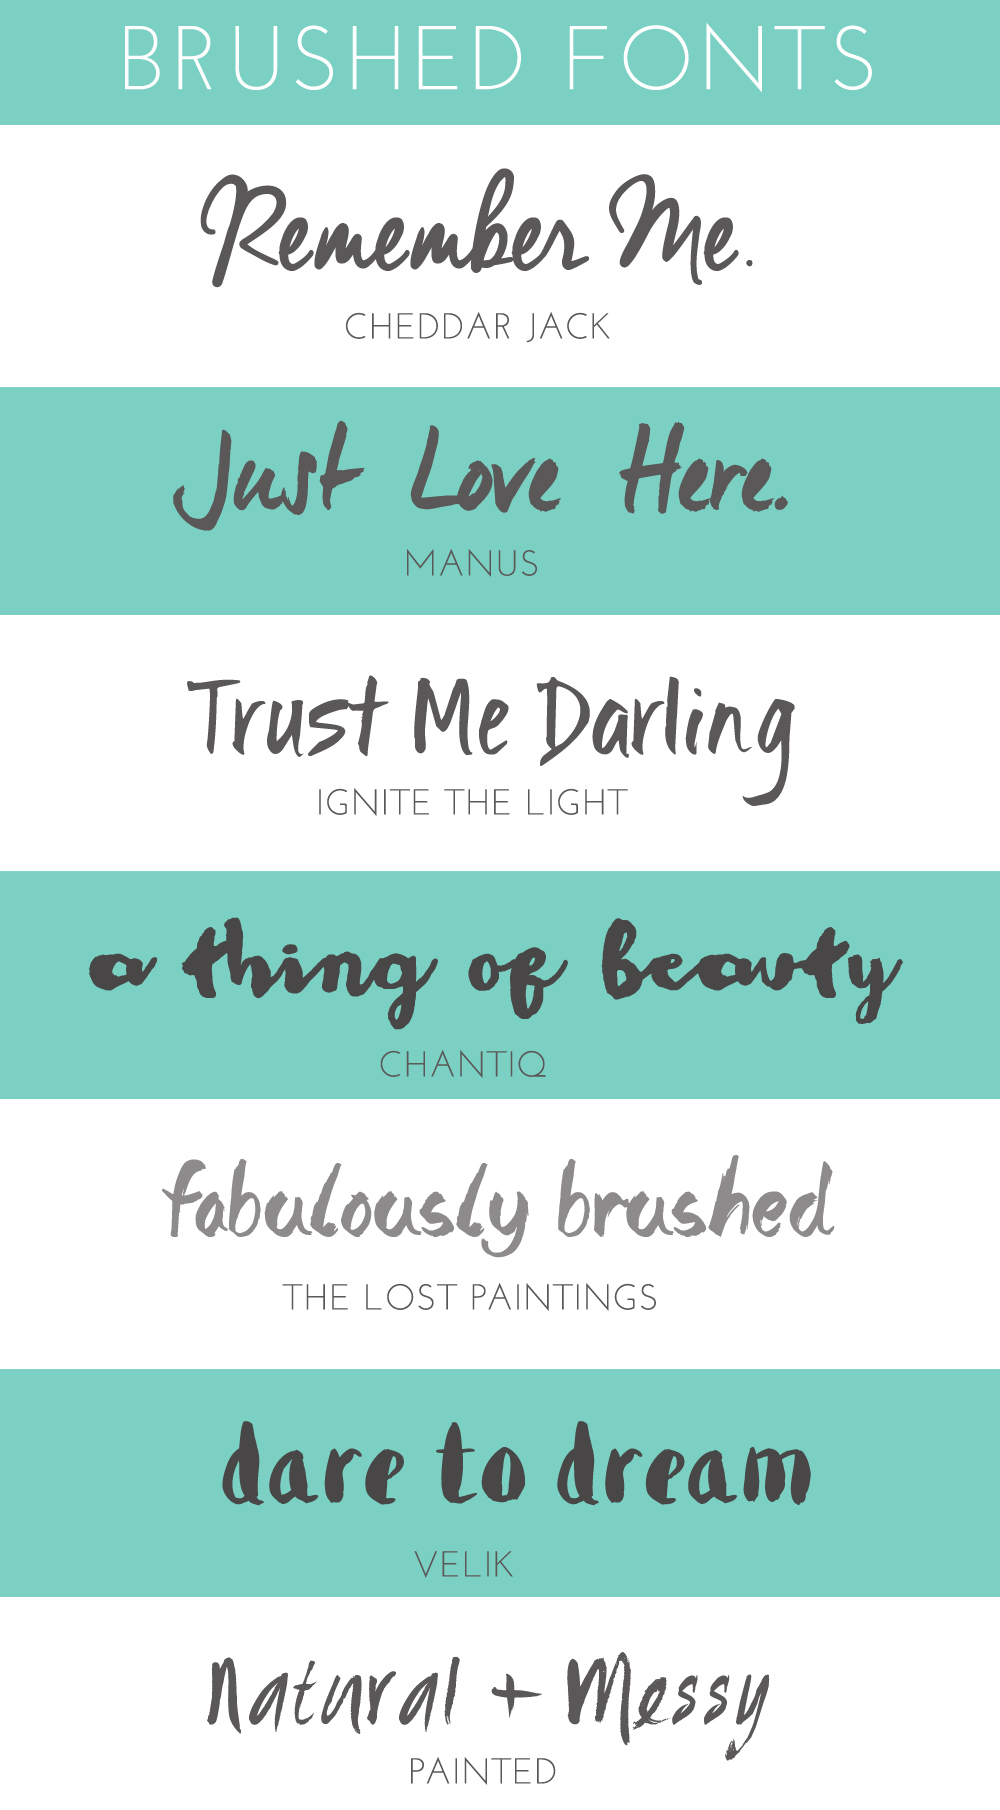 Brush Lettering Fonts You'll Love | angiemakes.com